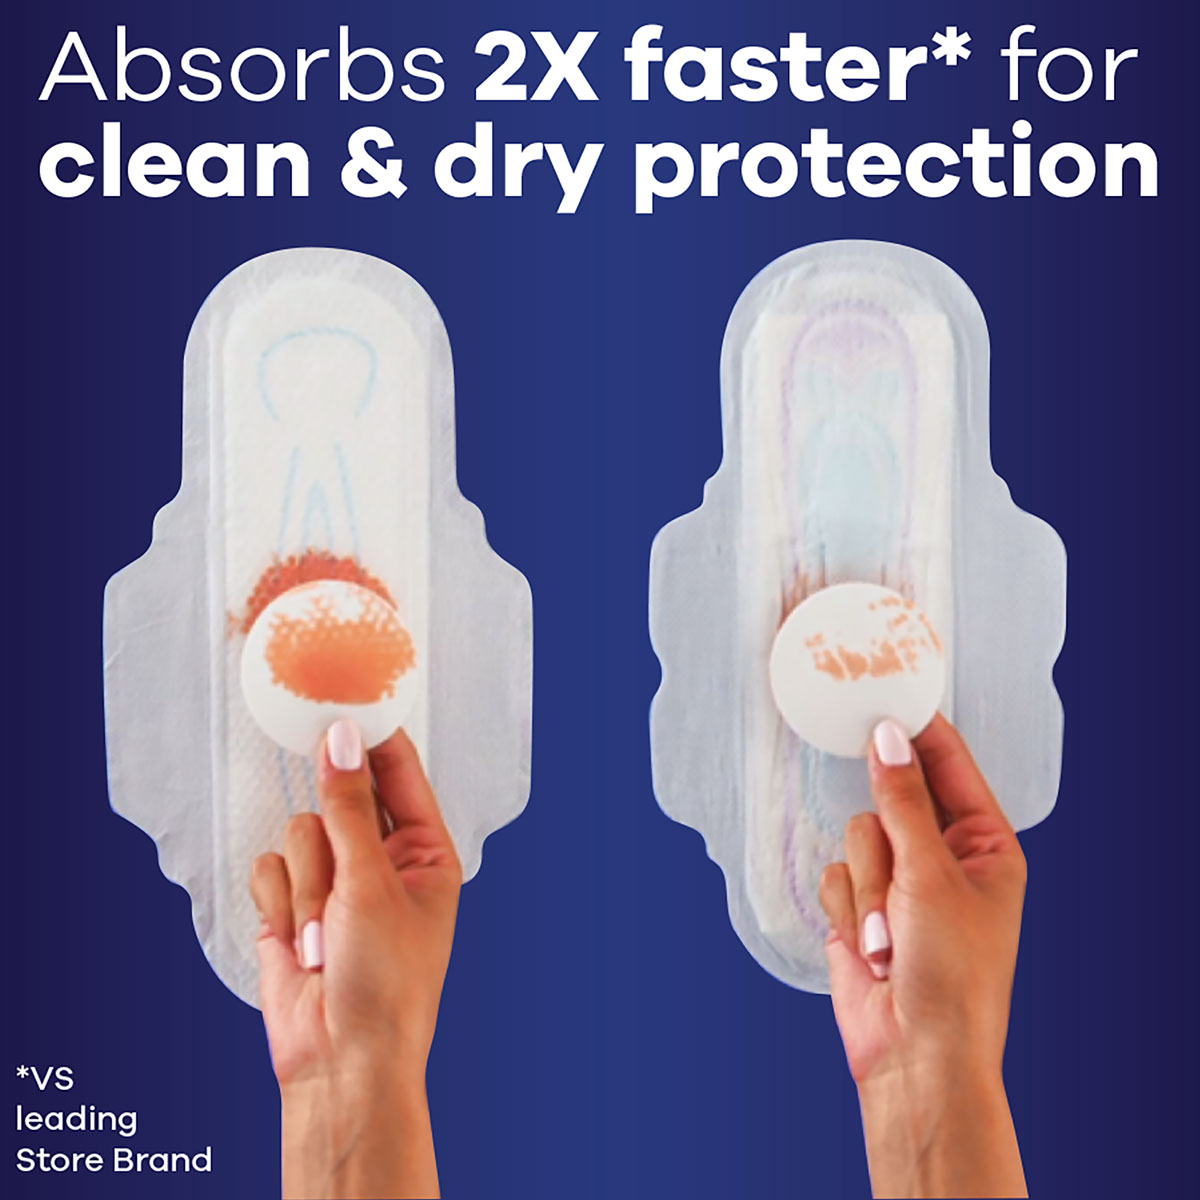 Absorbs 2X faster for clean & dry protection Ultra Thin Size 4